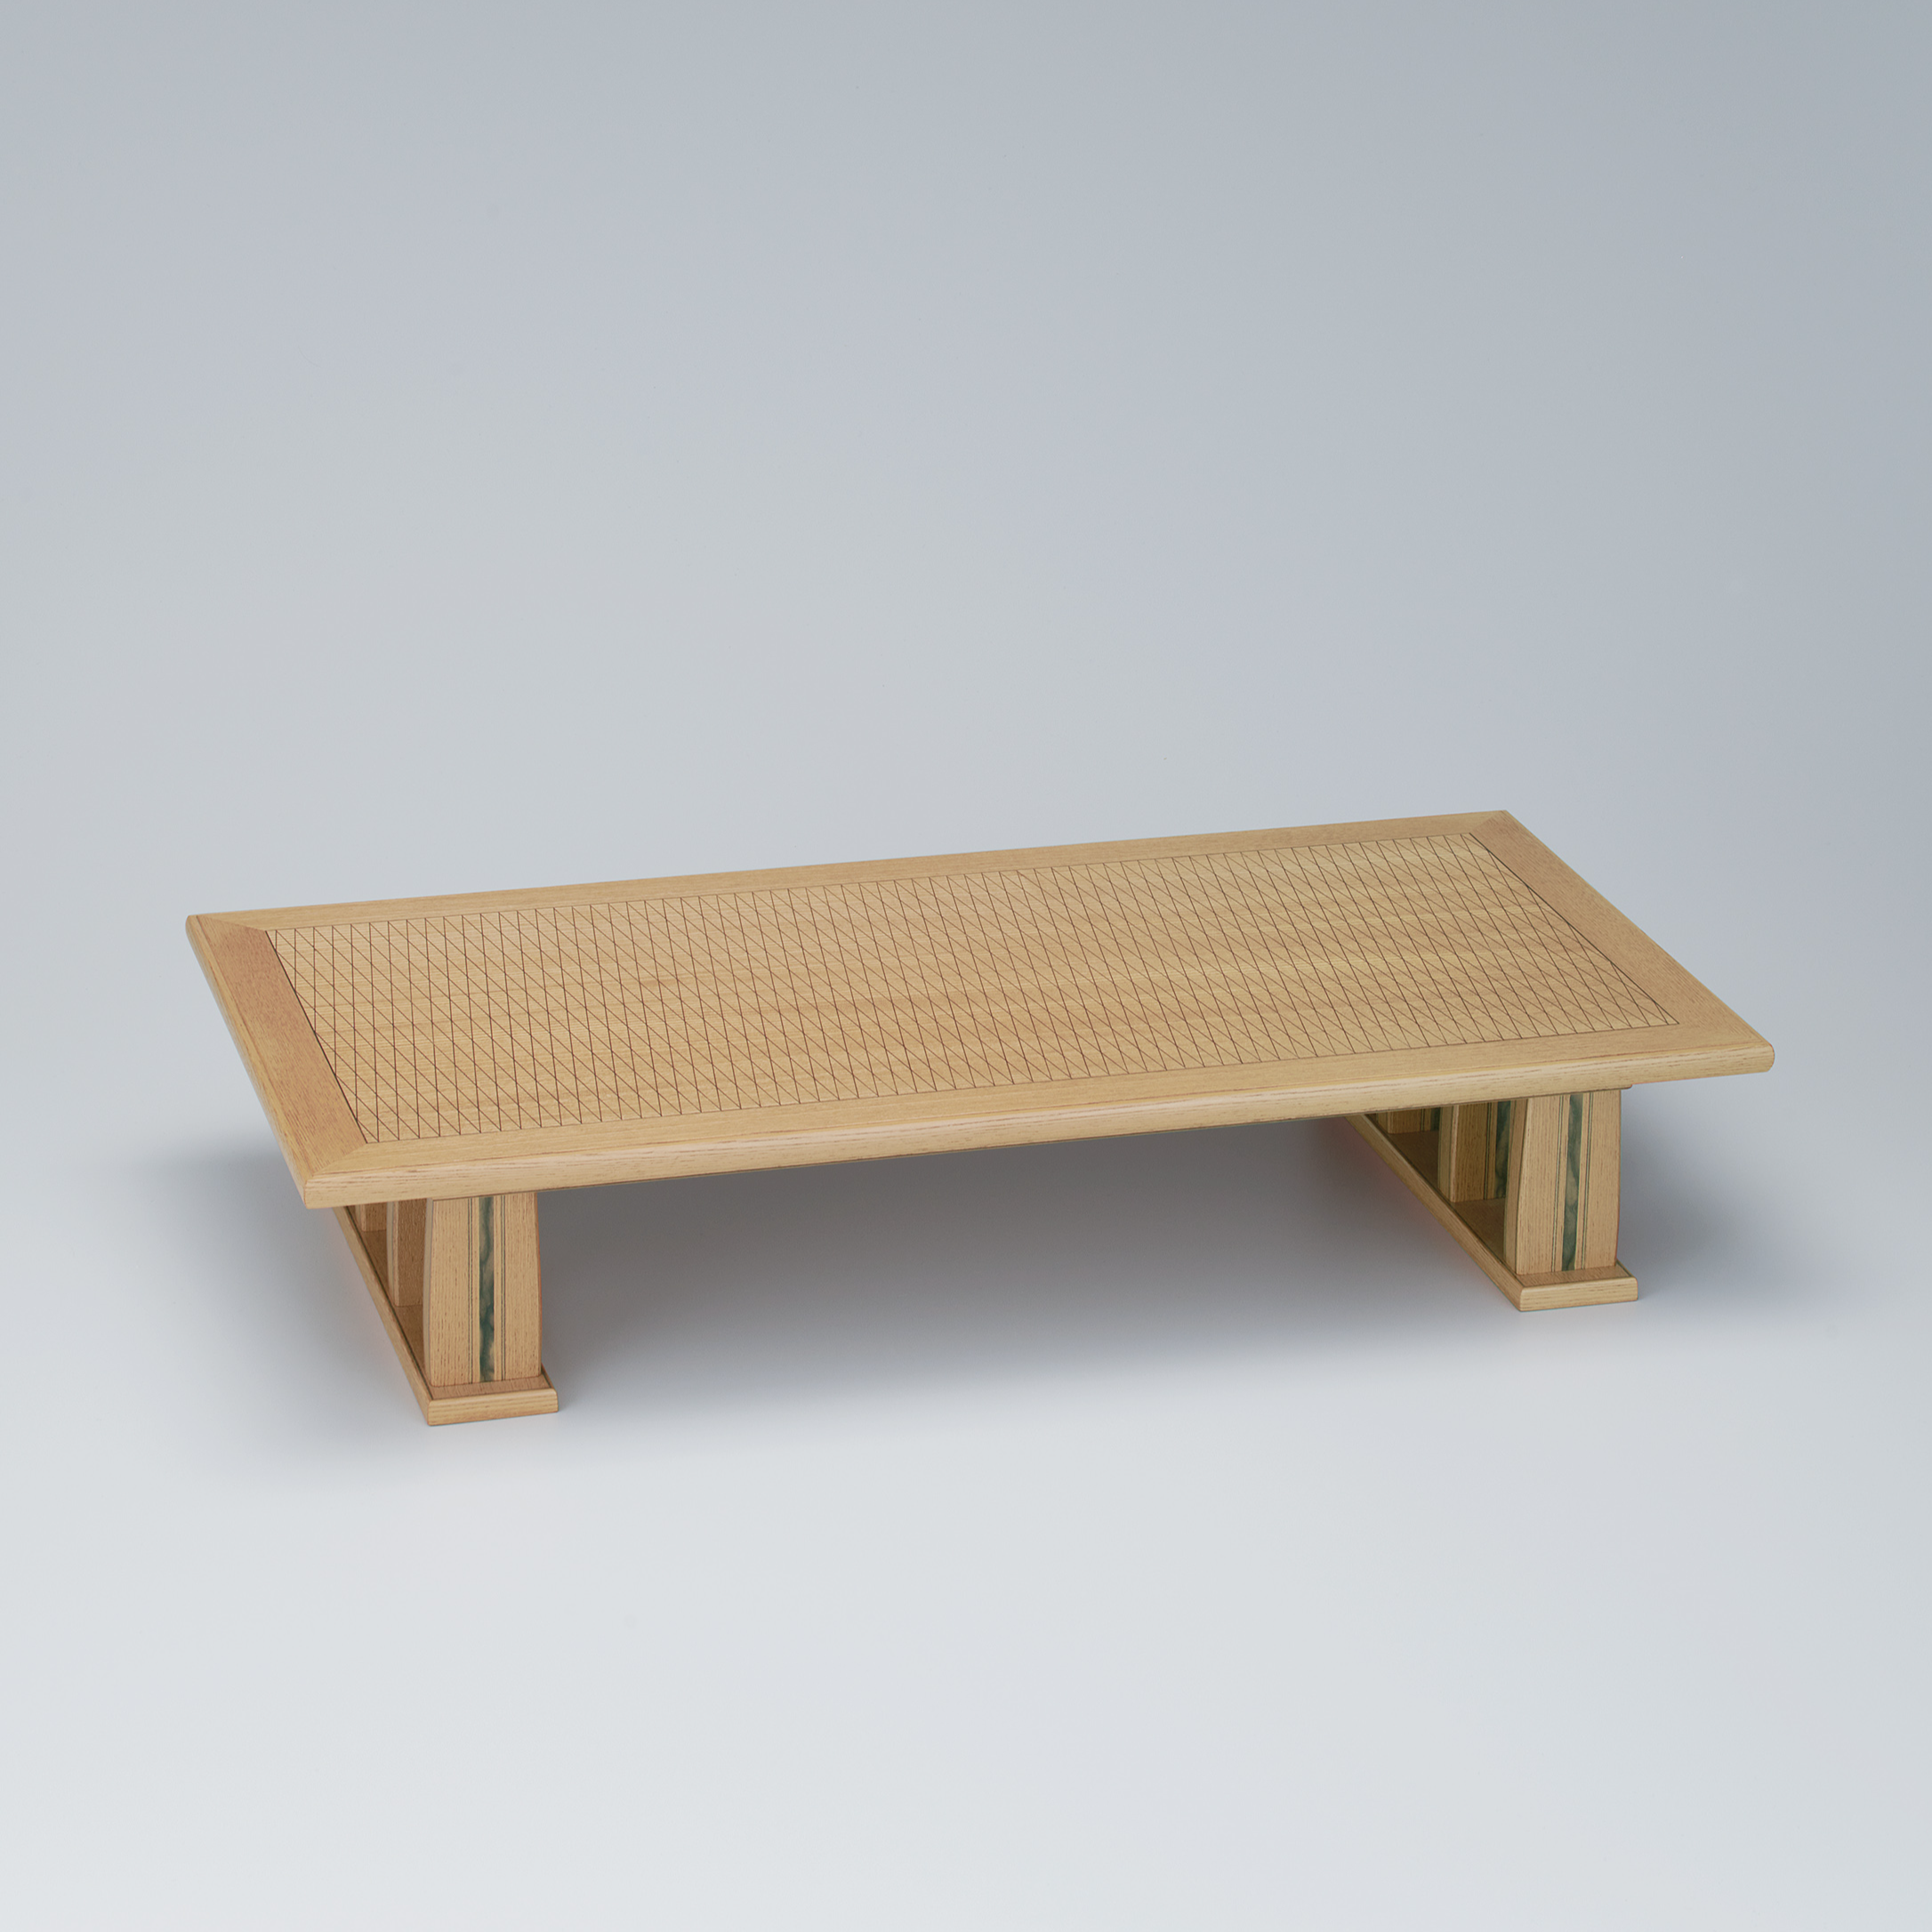 photo Low table of straight grain zelkova wood with inlay decoration.